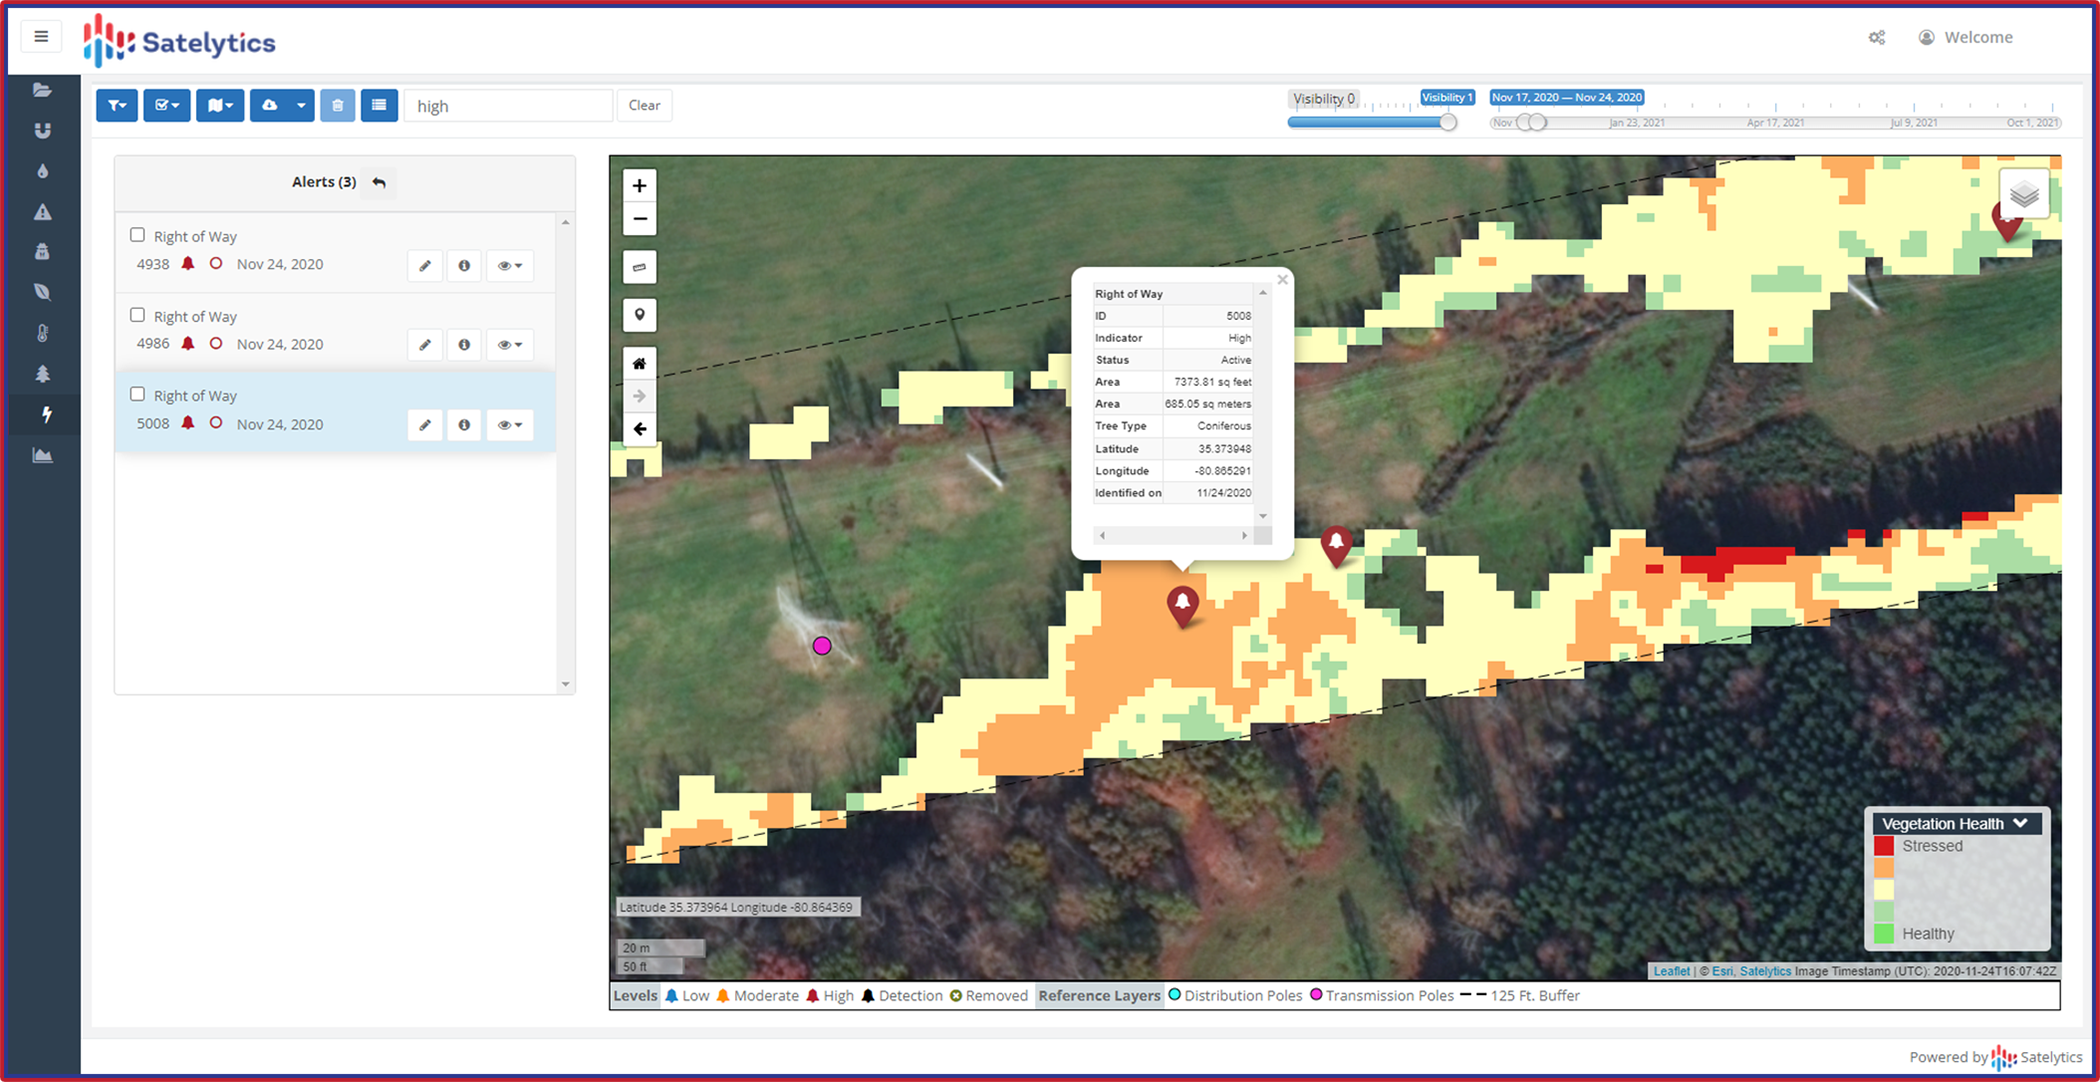 Monitor health and proximity of trees to assets, send crews only where needed.